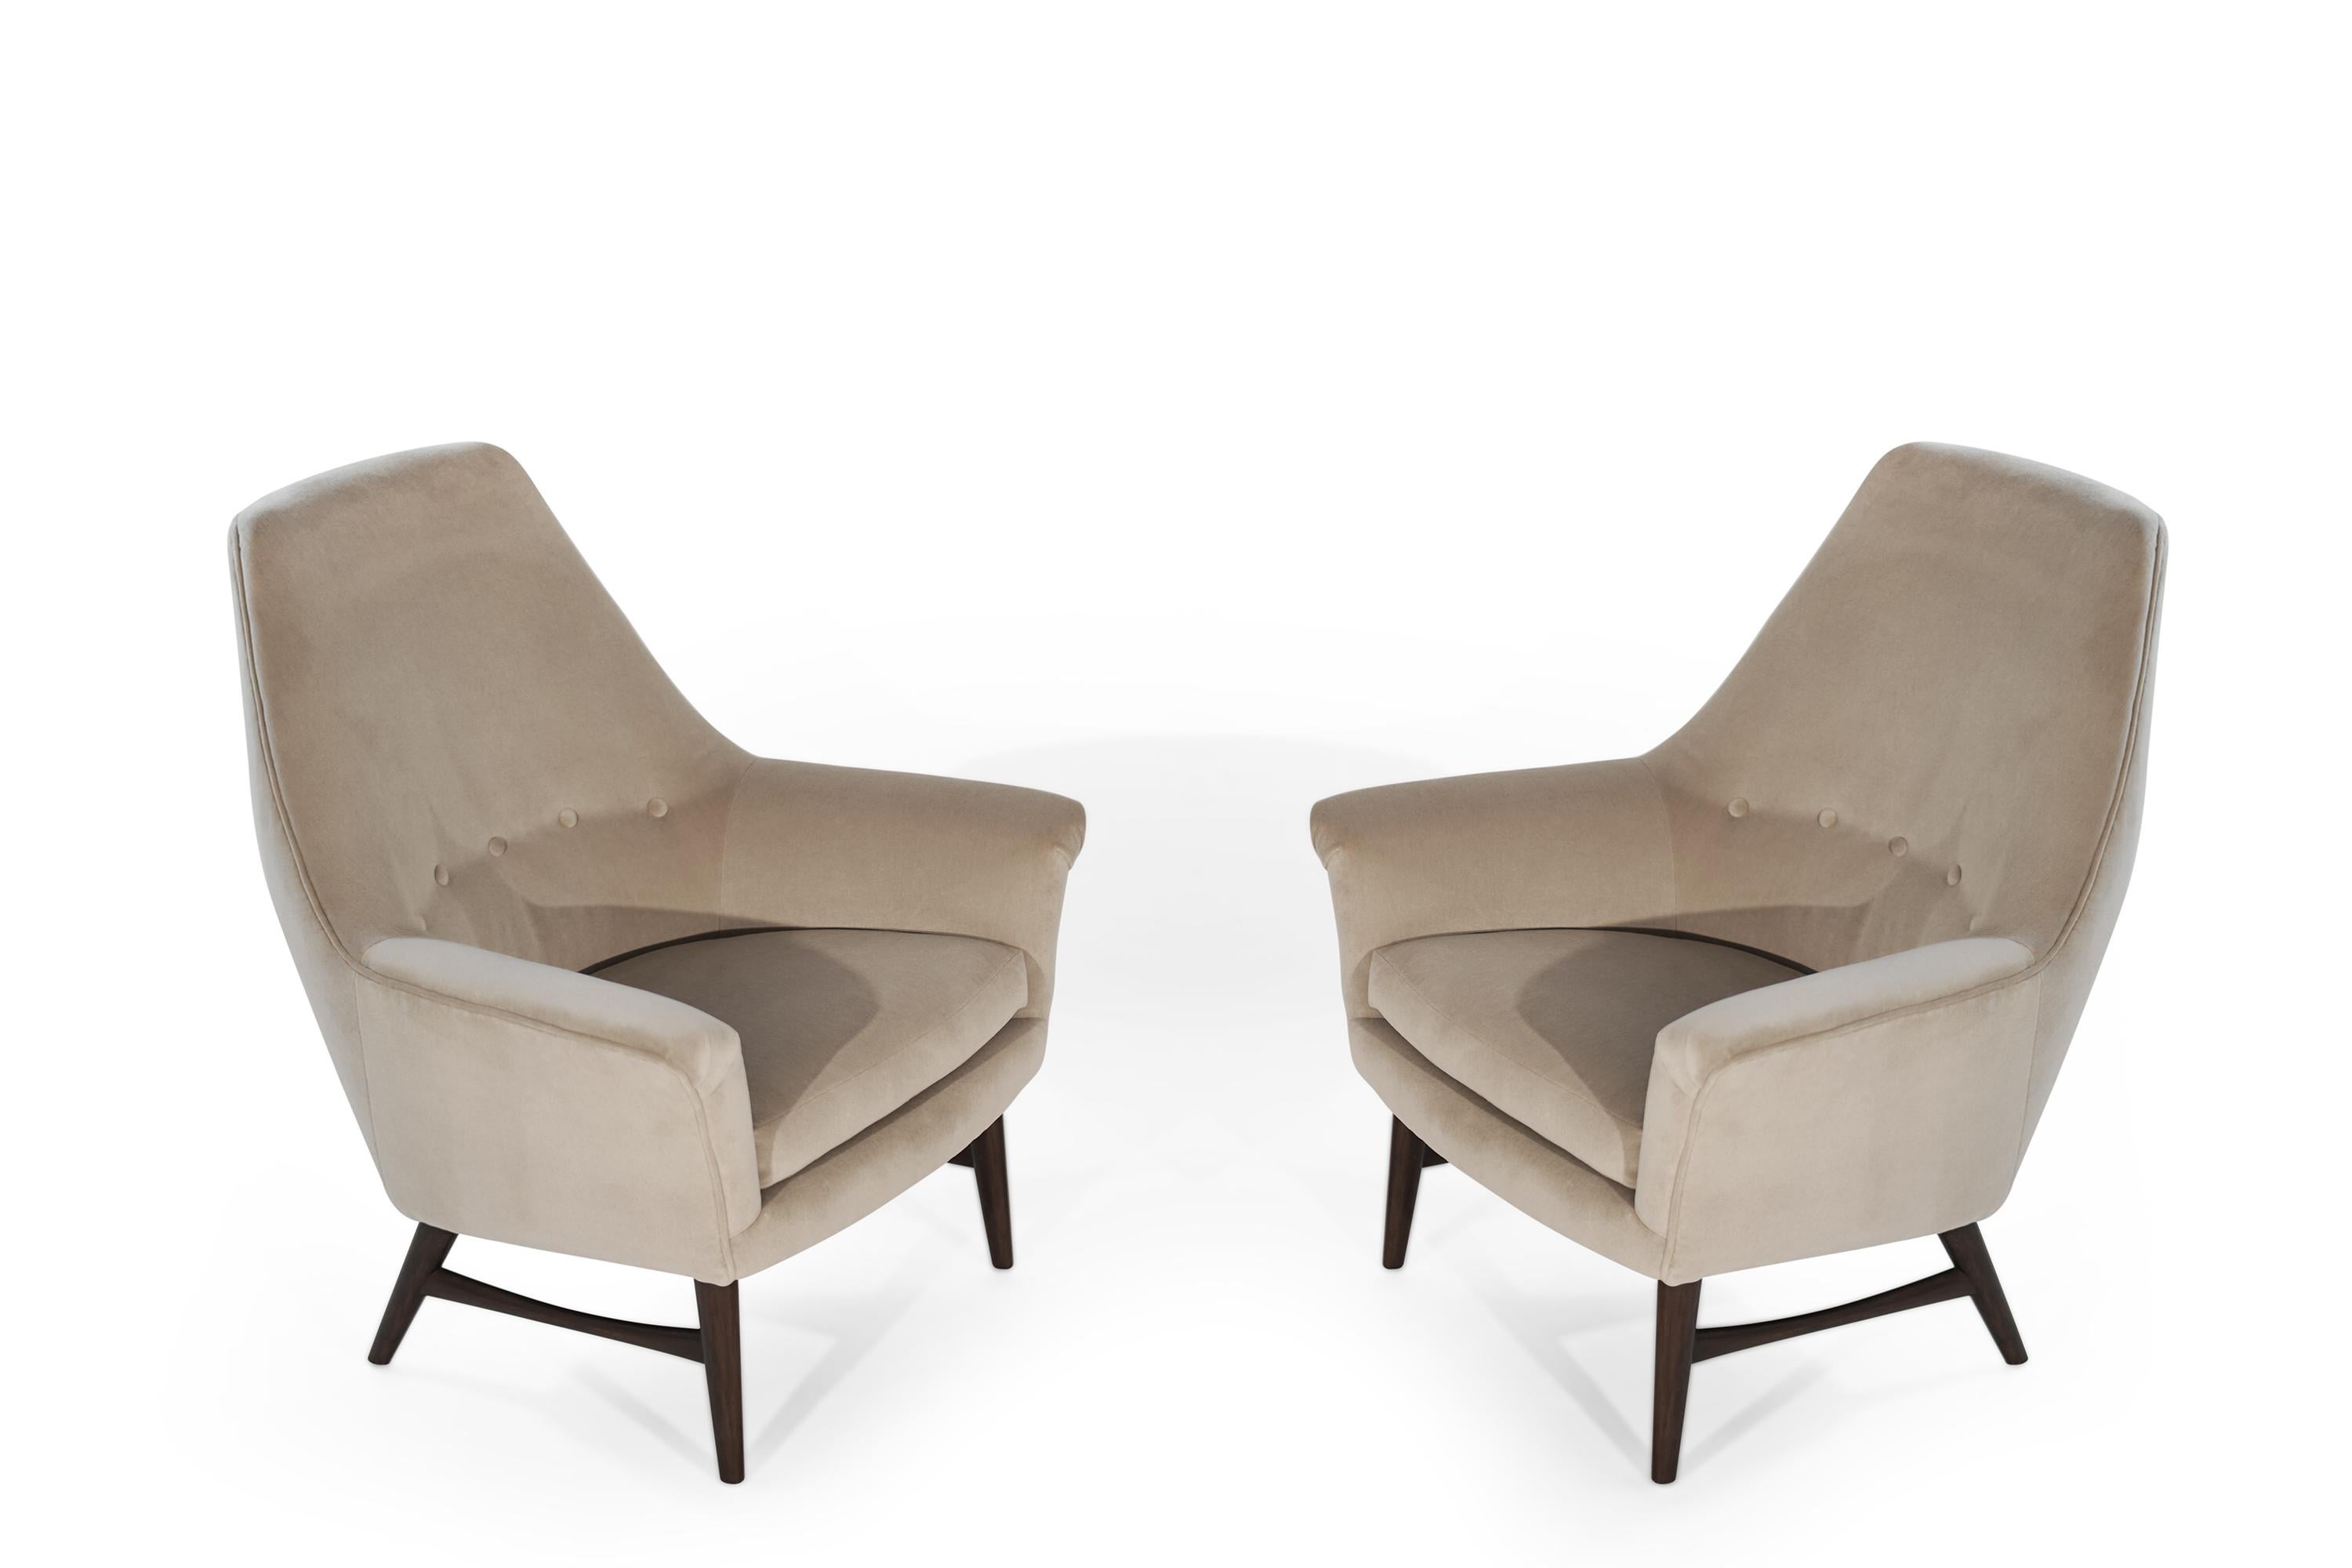 Set of Scandinavian-Modern high-back lounge chairs designed by Oscar Langlo for P.I. Langlos Fabrikker AS Stranda Furniture, circa 1950s. 
Newly upholstered in natural alpaca velvet by Holly Hunt. Sculptural walnut bases fully restored.